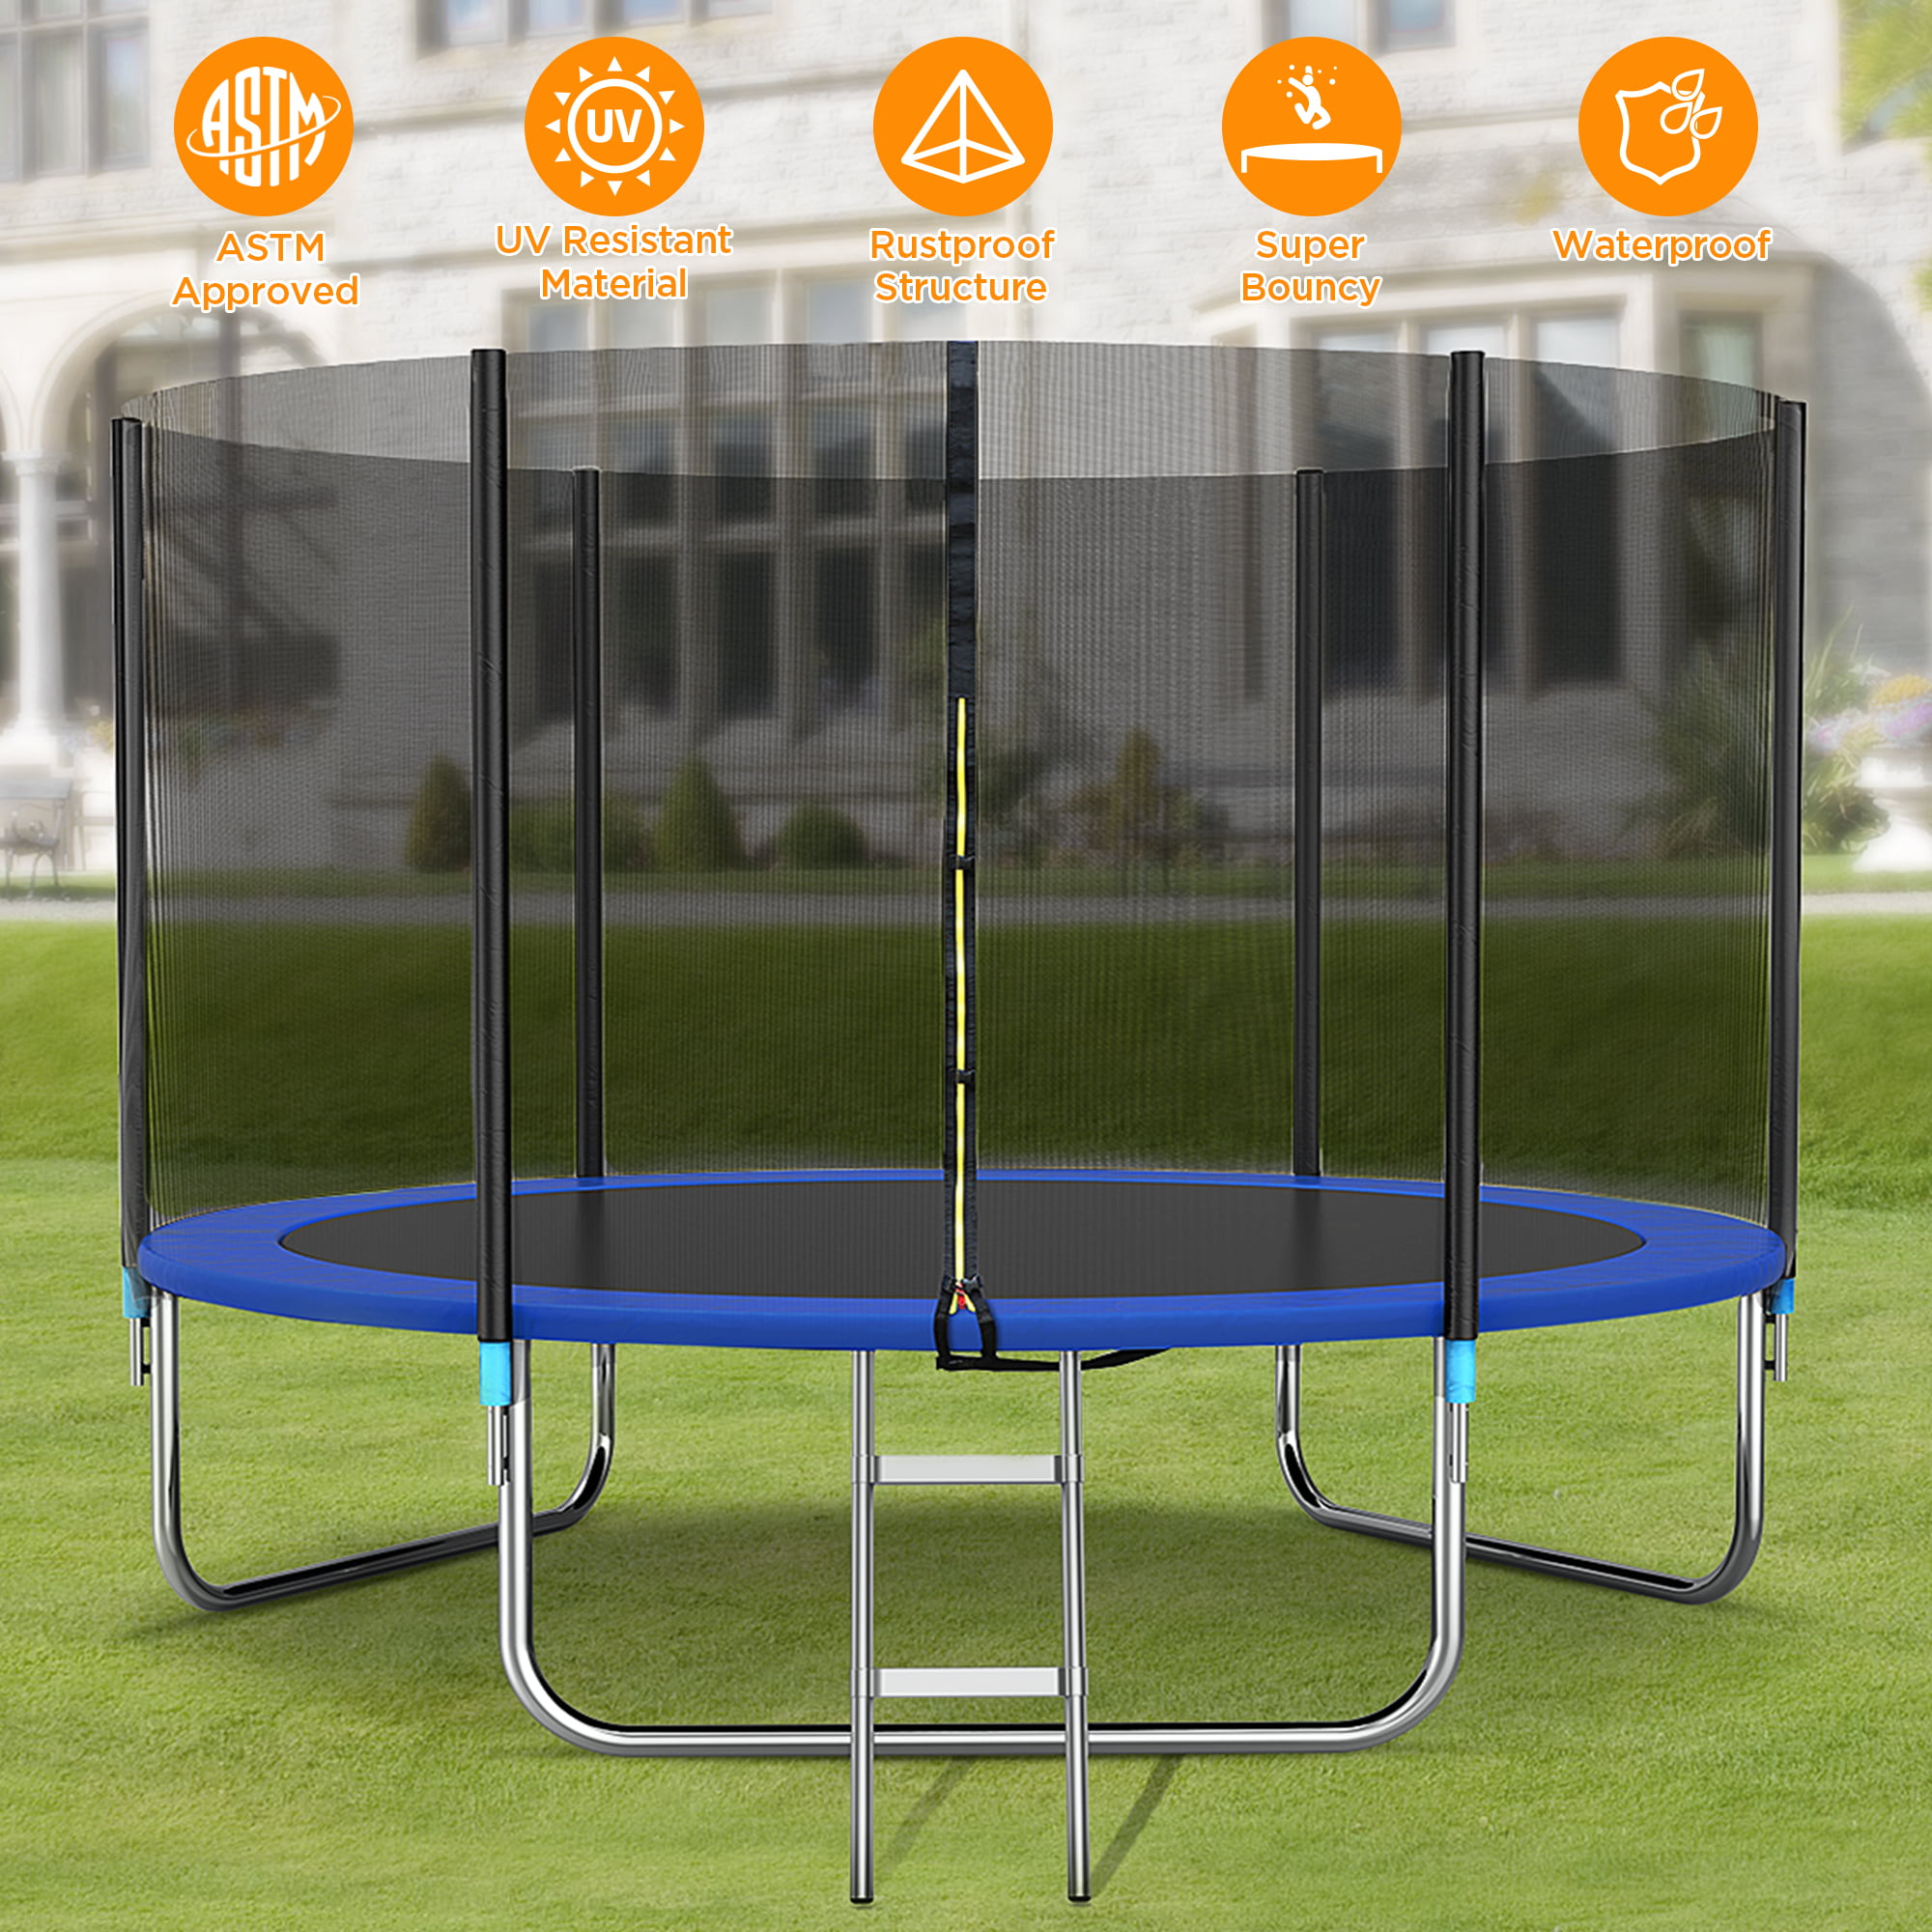 Youdw 10 FT Outdoor Kids Adult Trampoline with Enclosure Net Jumping Mat and Spring Cover Padding Large Bungee Bed with Protective net with Safety Enclosure Net Spring Pad Great Gift Blue